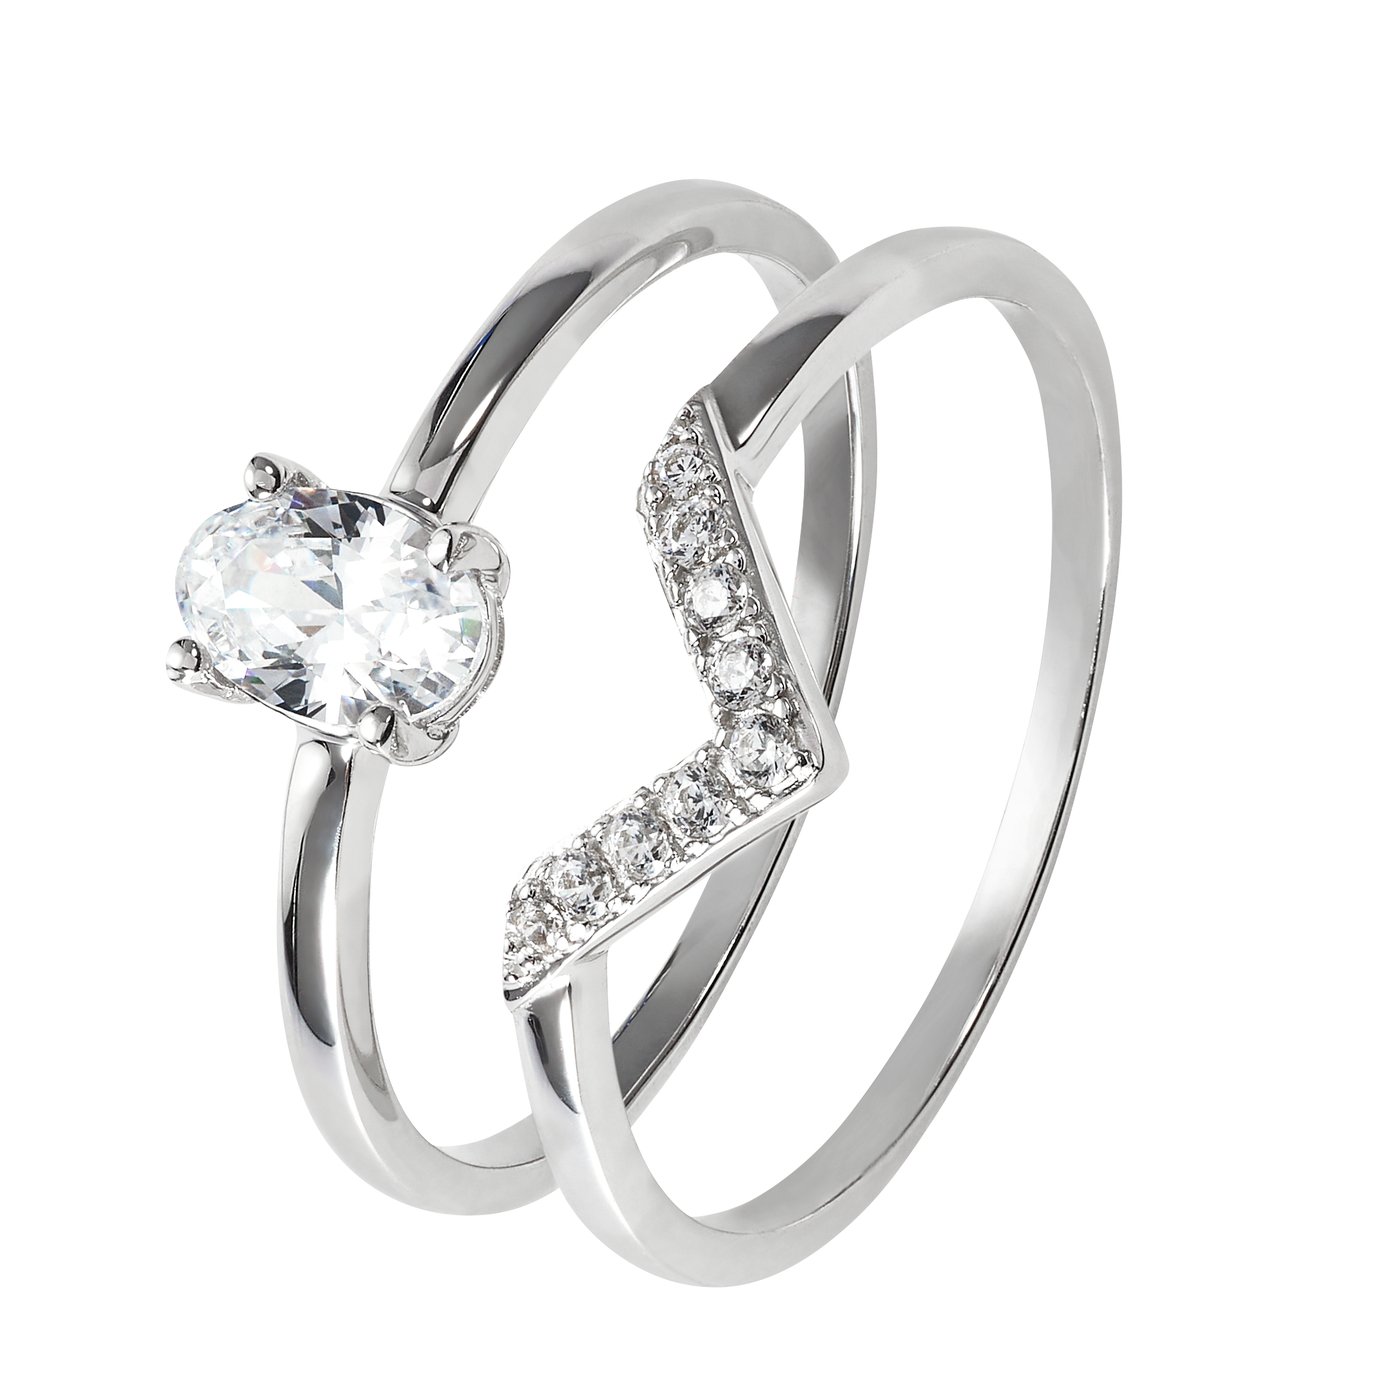 Revere 9ct White Gold Cubic Zirconia Engagement Ring - R